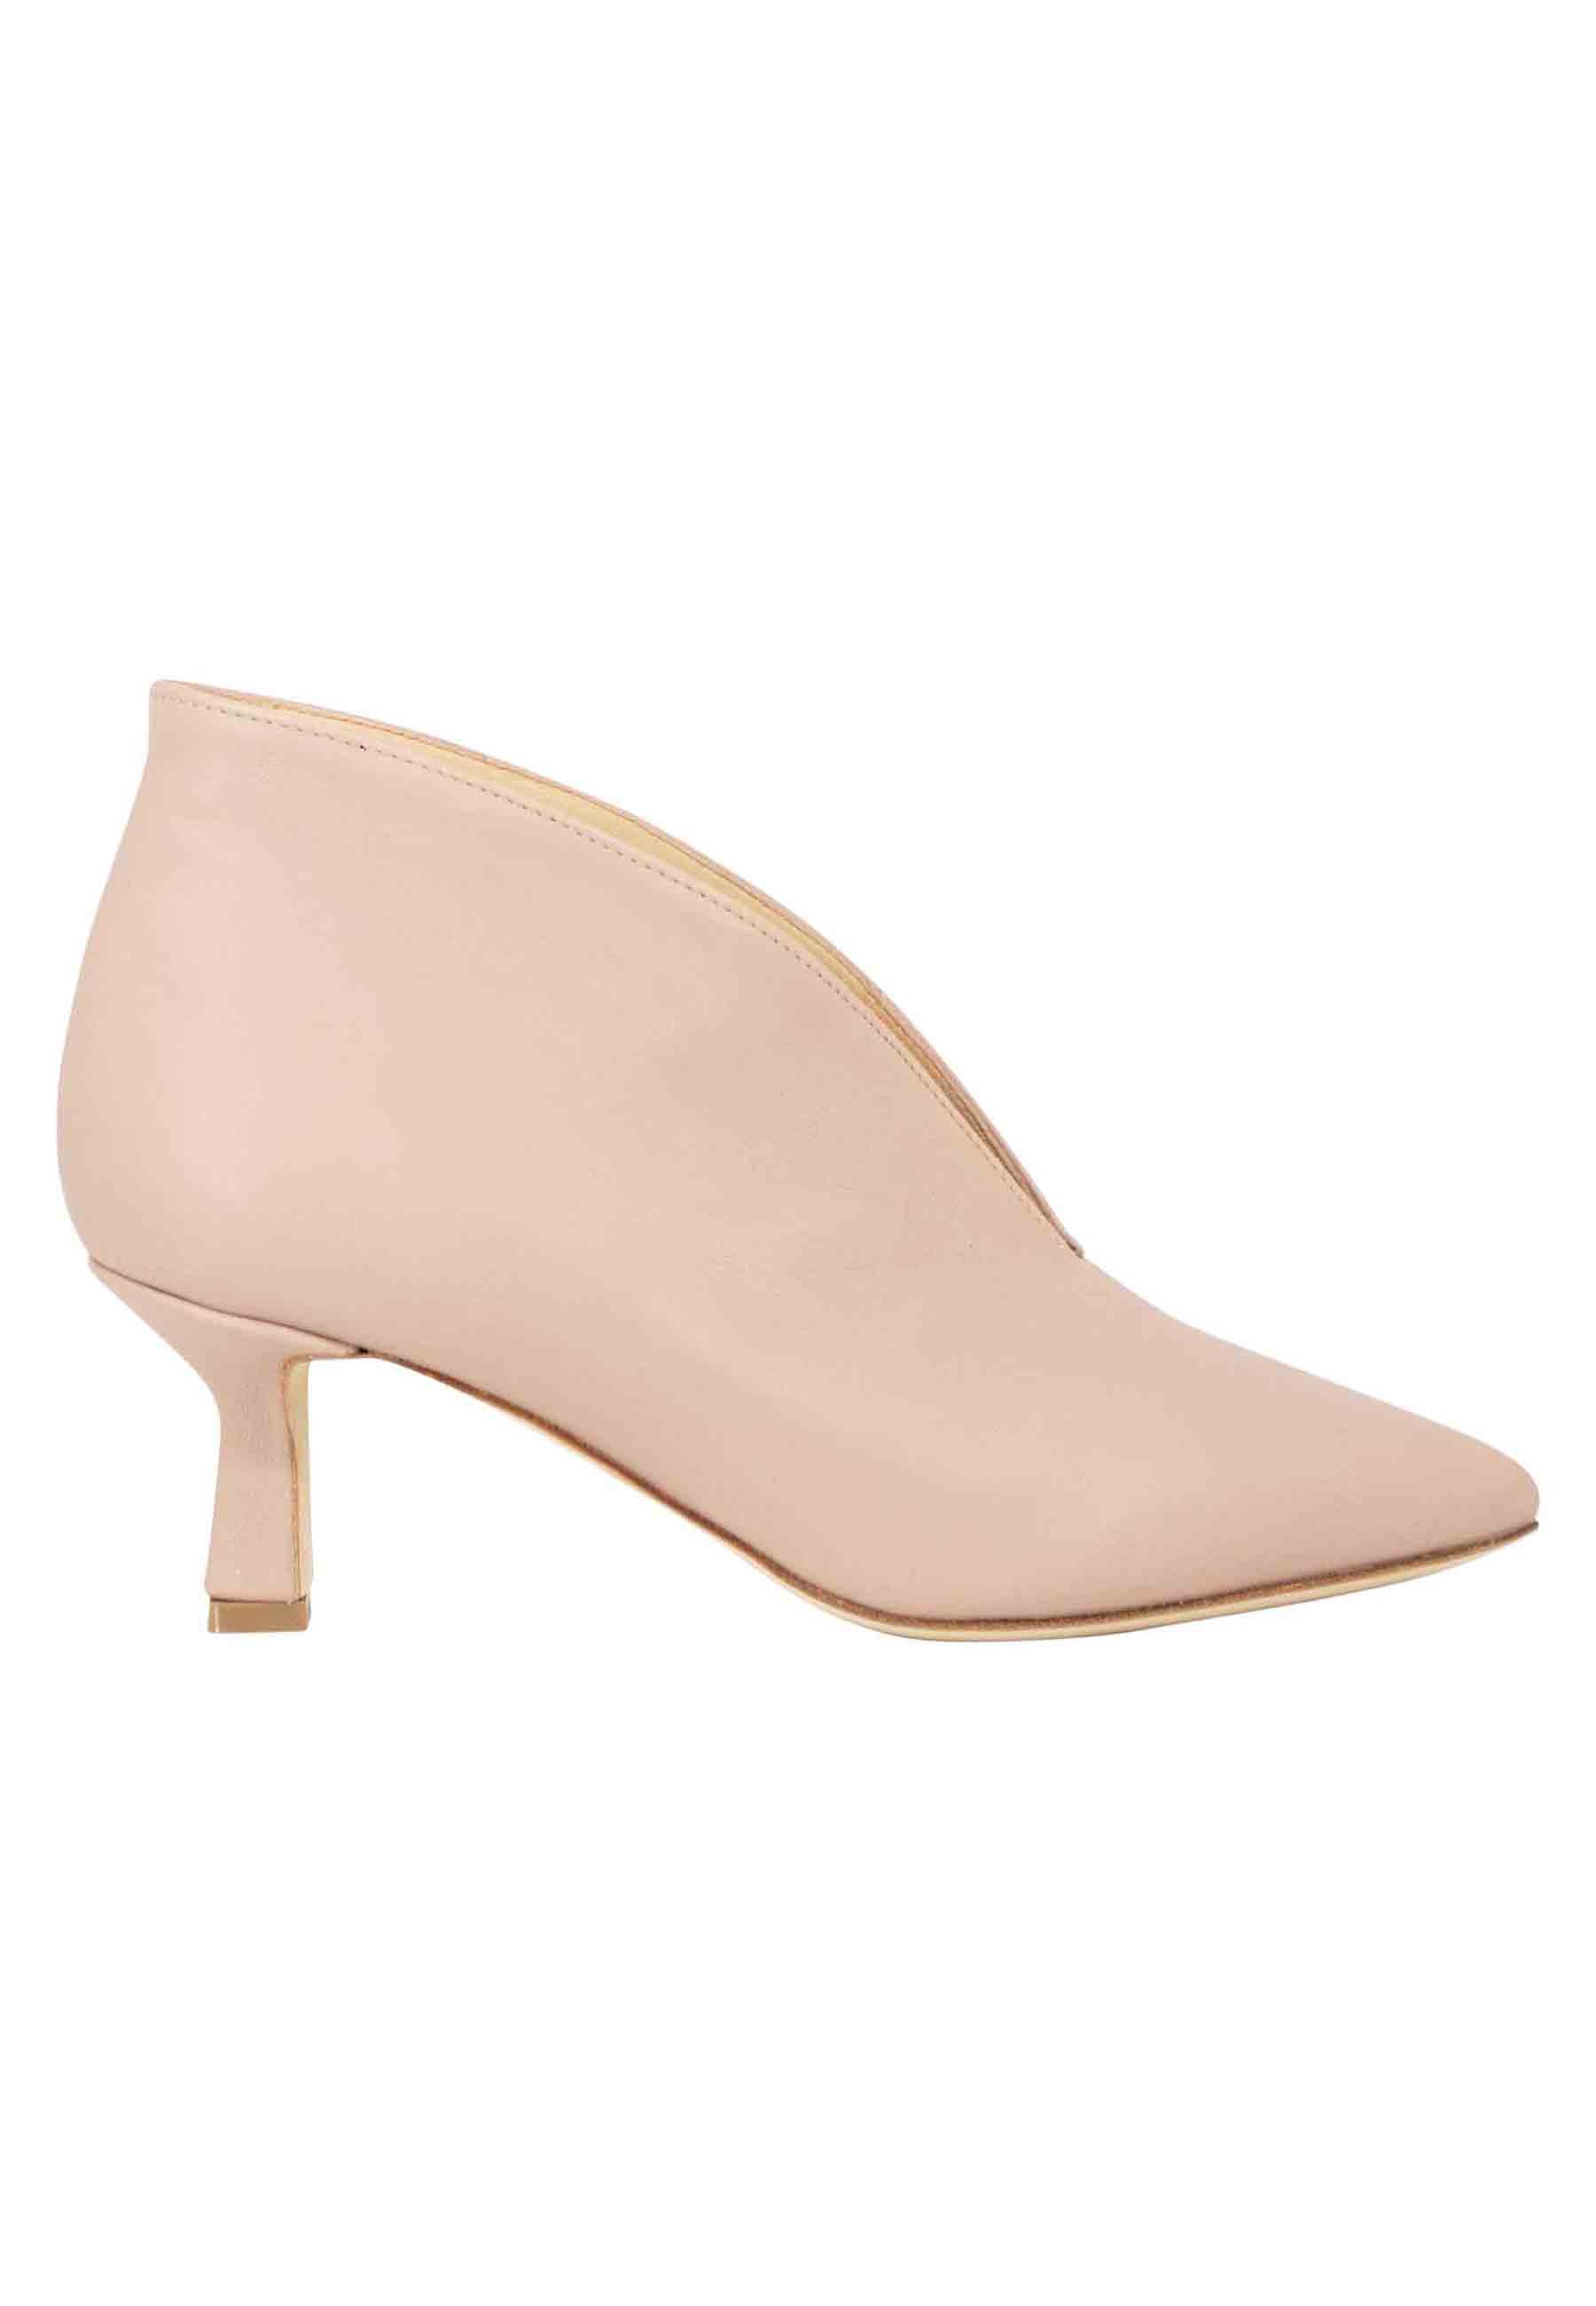 Women's ankle boot in powder pink leather with low heel